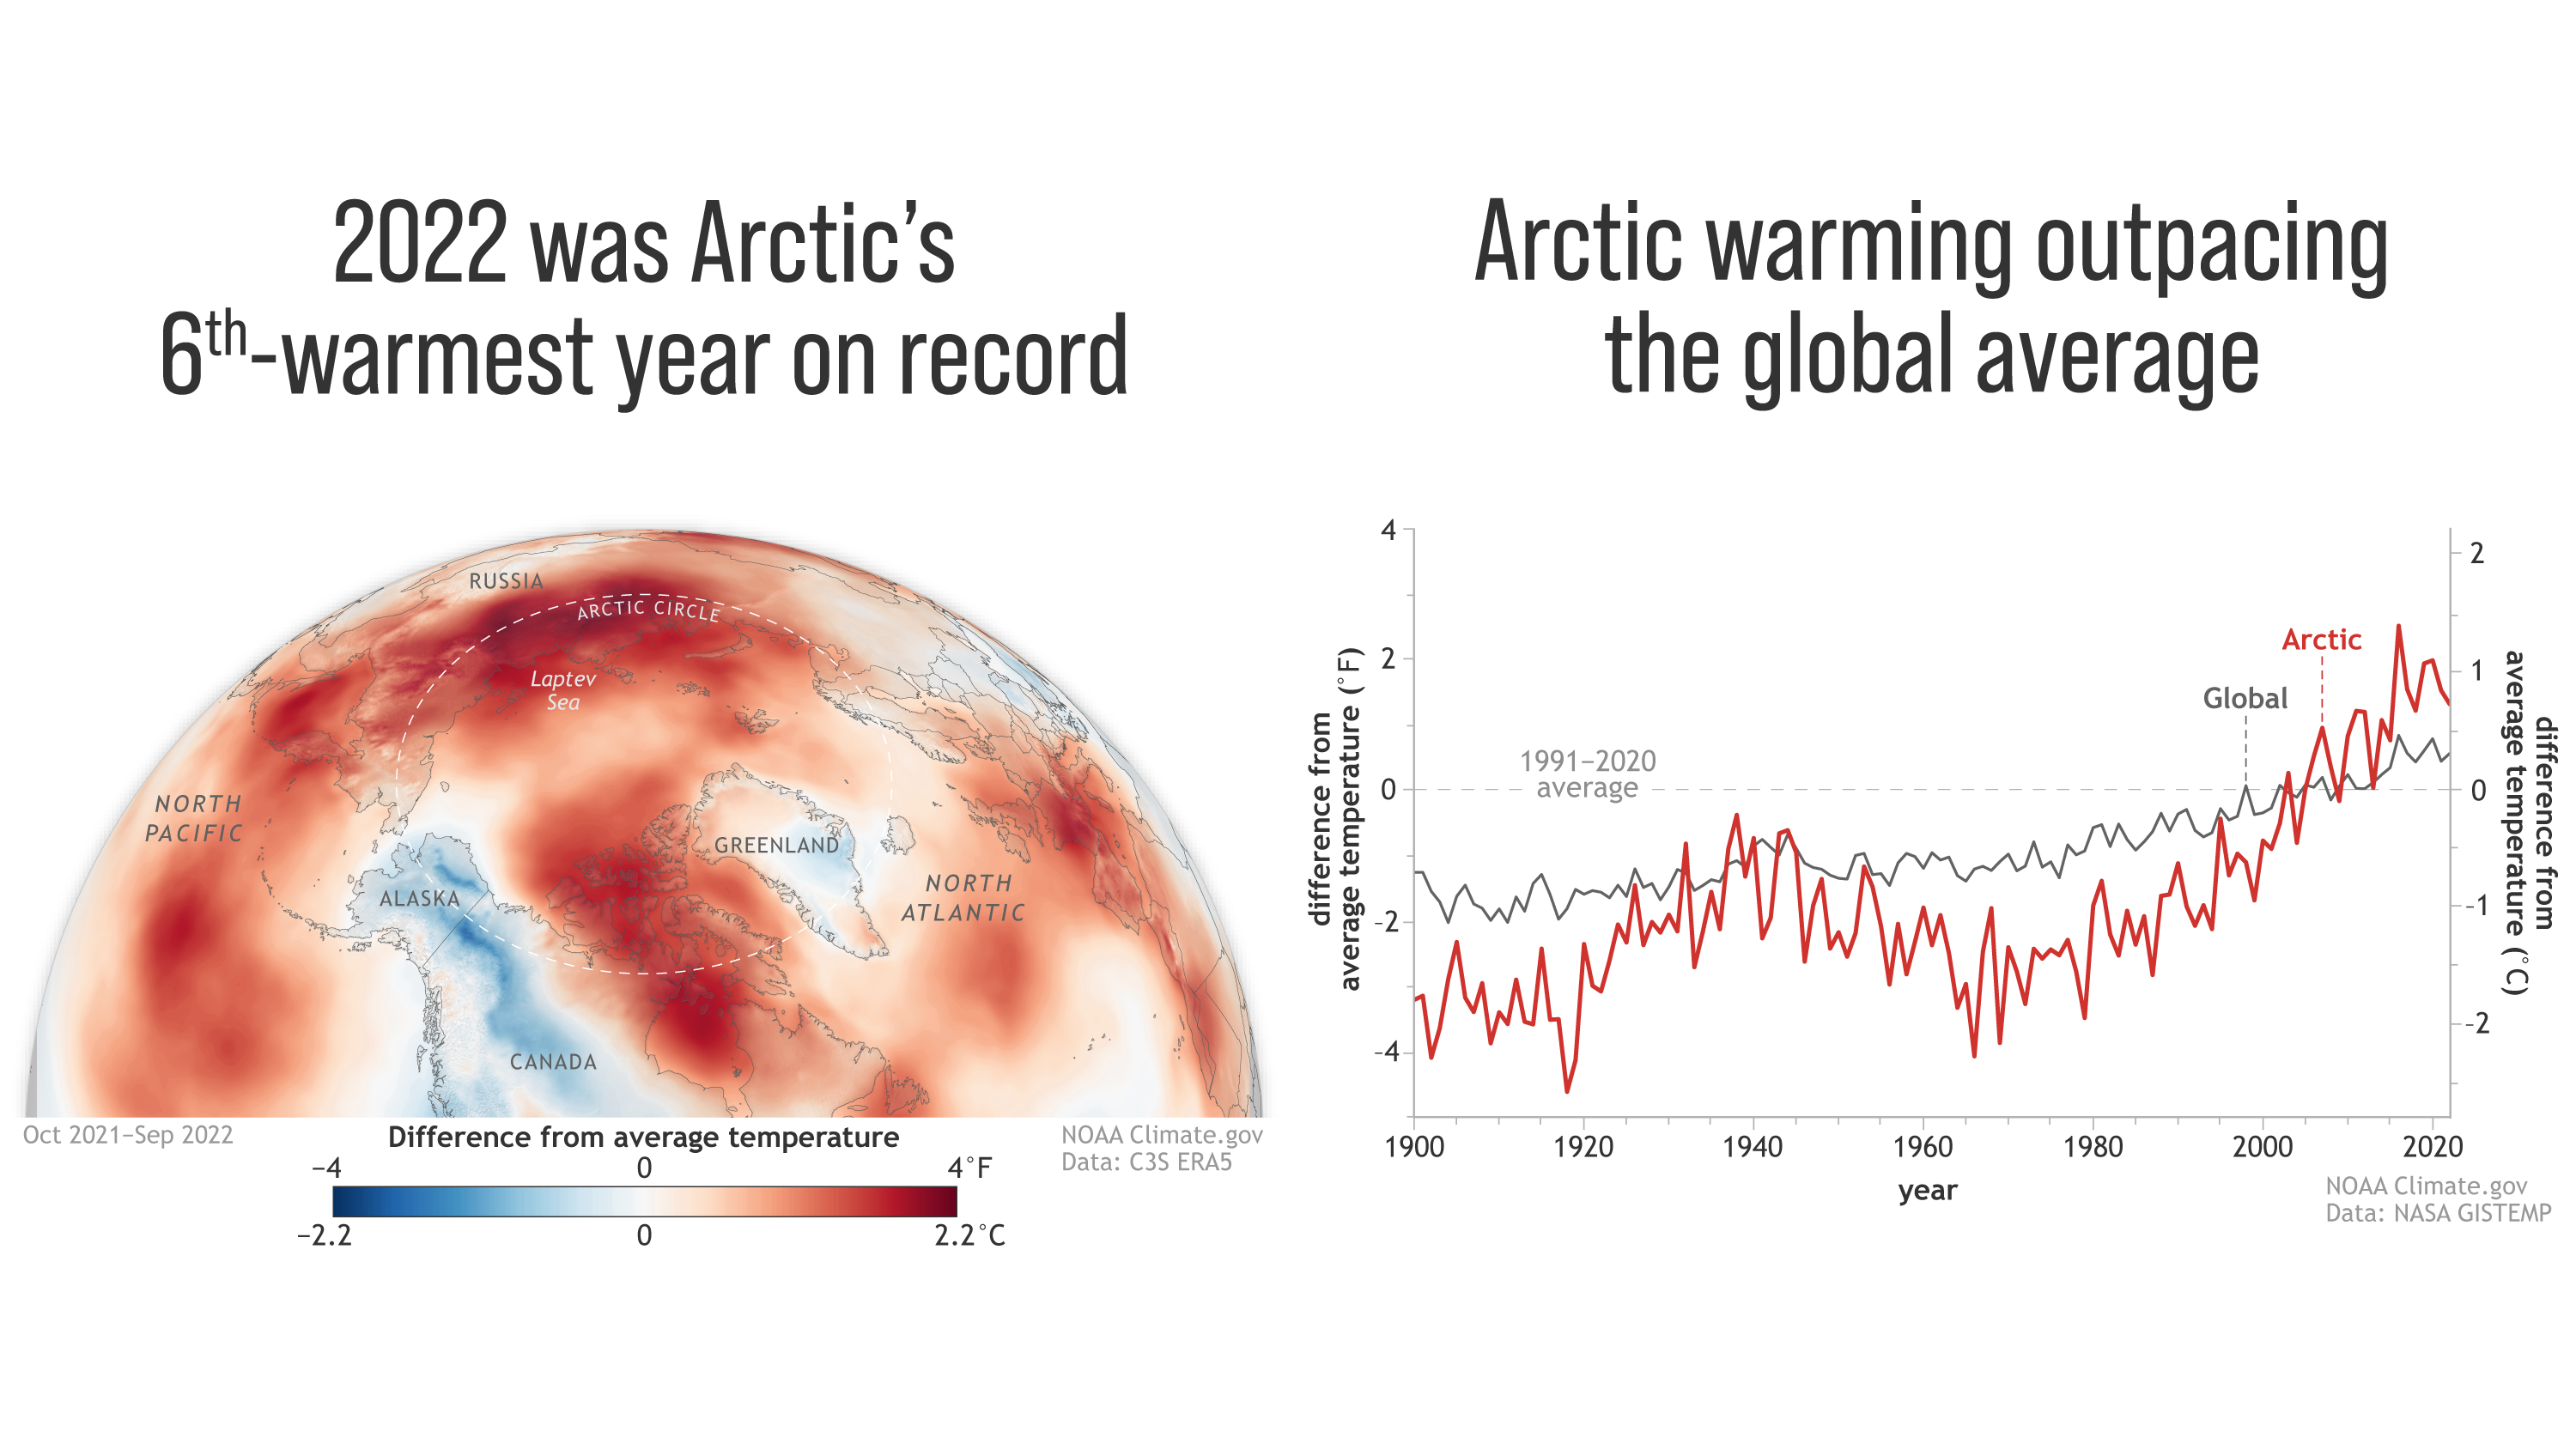 a graphic showing red for warmth on an Arctic map and a line graph showing warming in the Arctic